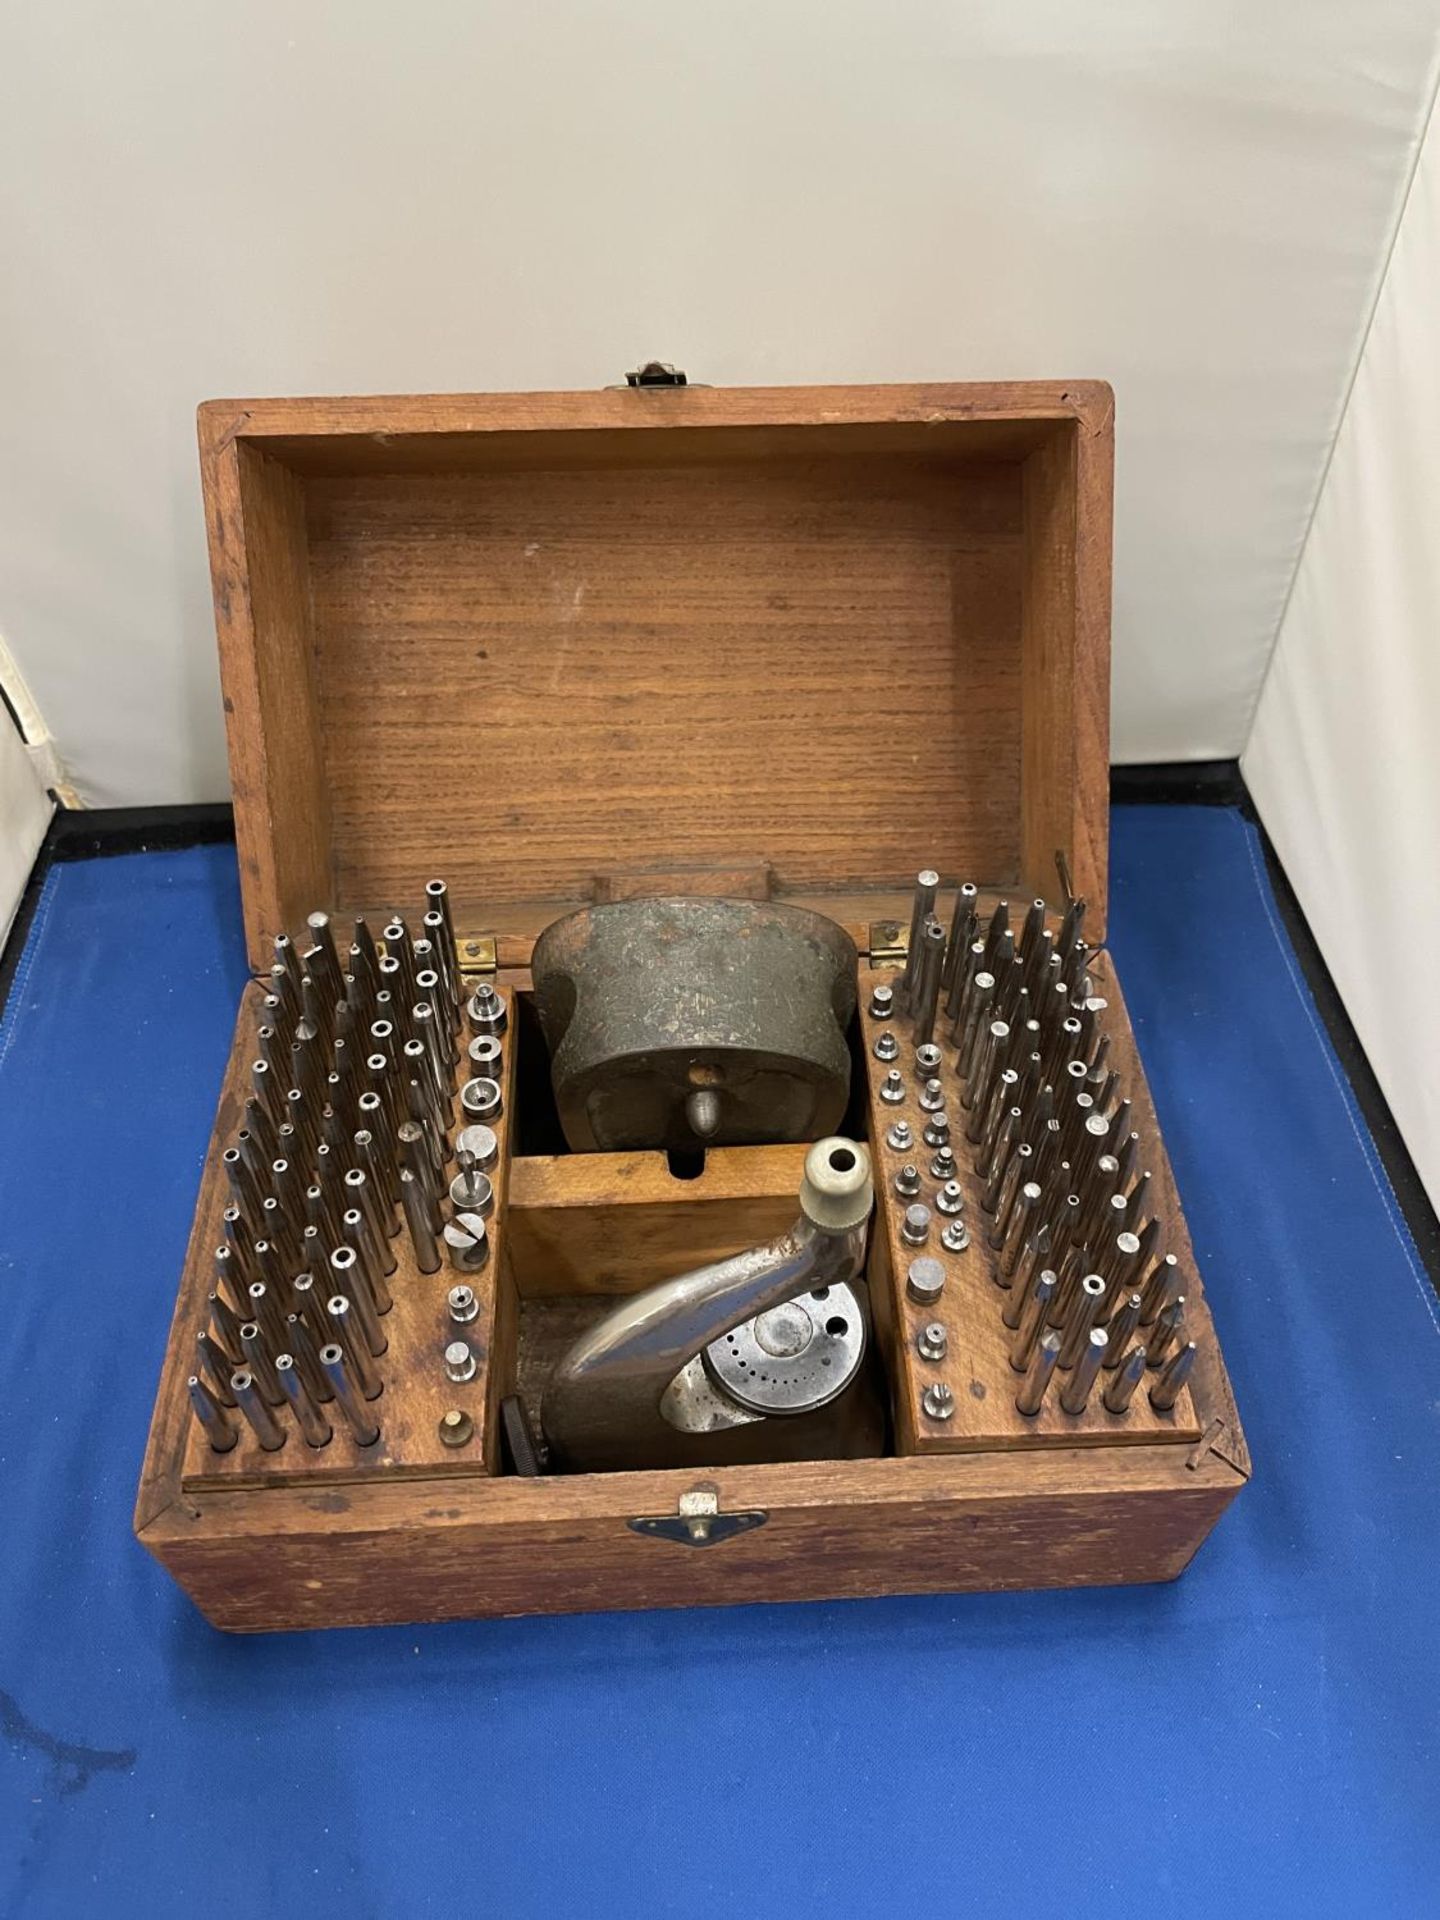 A BOLEY WATCHMAKERS RIVETING AND STAKING TOOLS (COMPLETE SET) IN ORIGINAL WOODEN BOX - Image 2 of 14